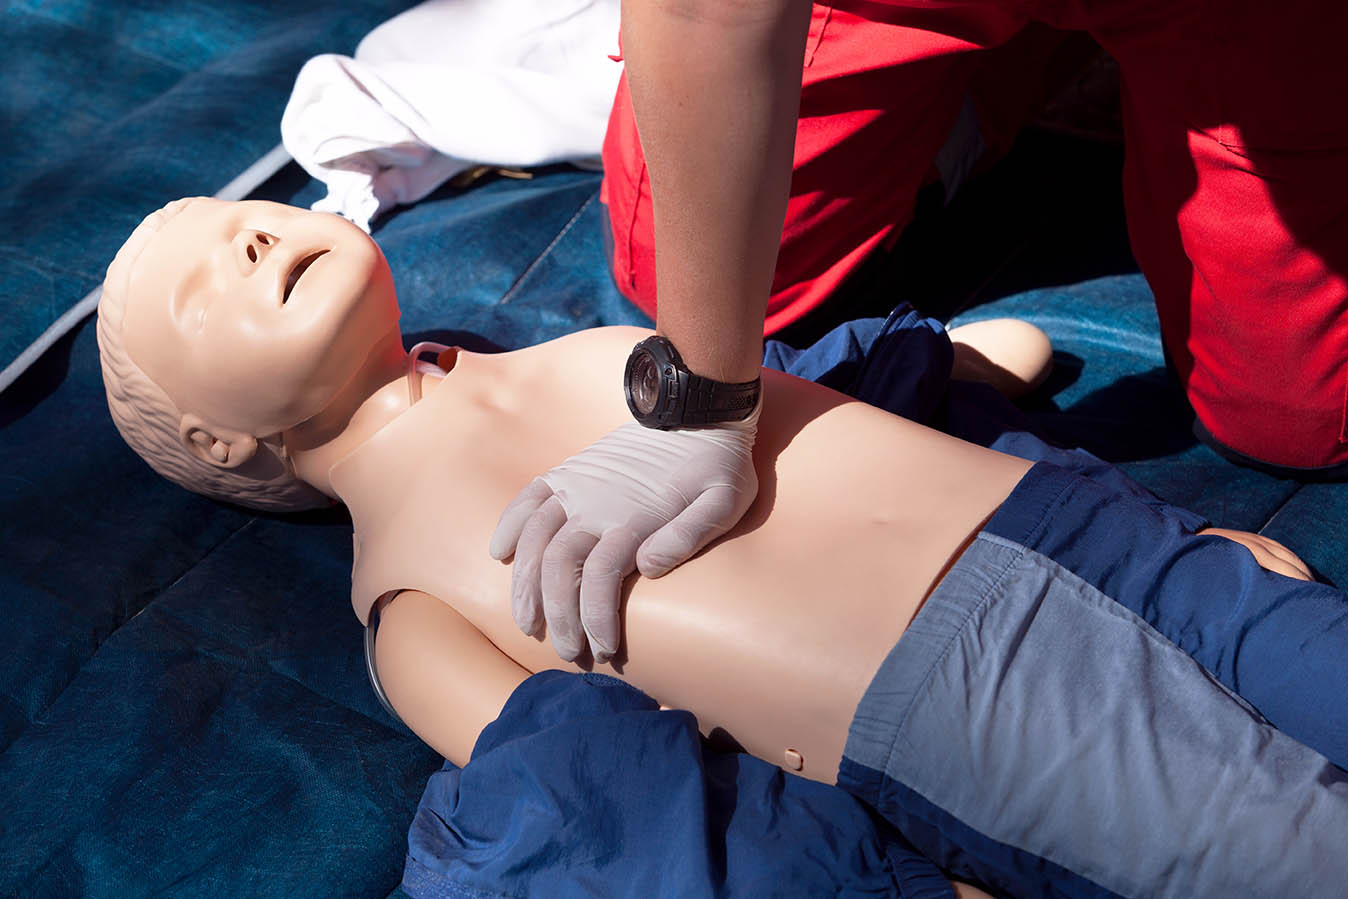 CPR - Cardiopulmonary resuscitation and first aid training